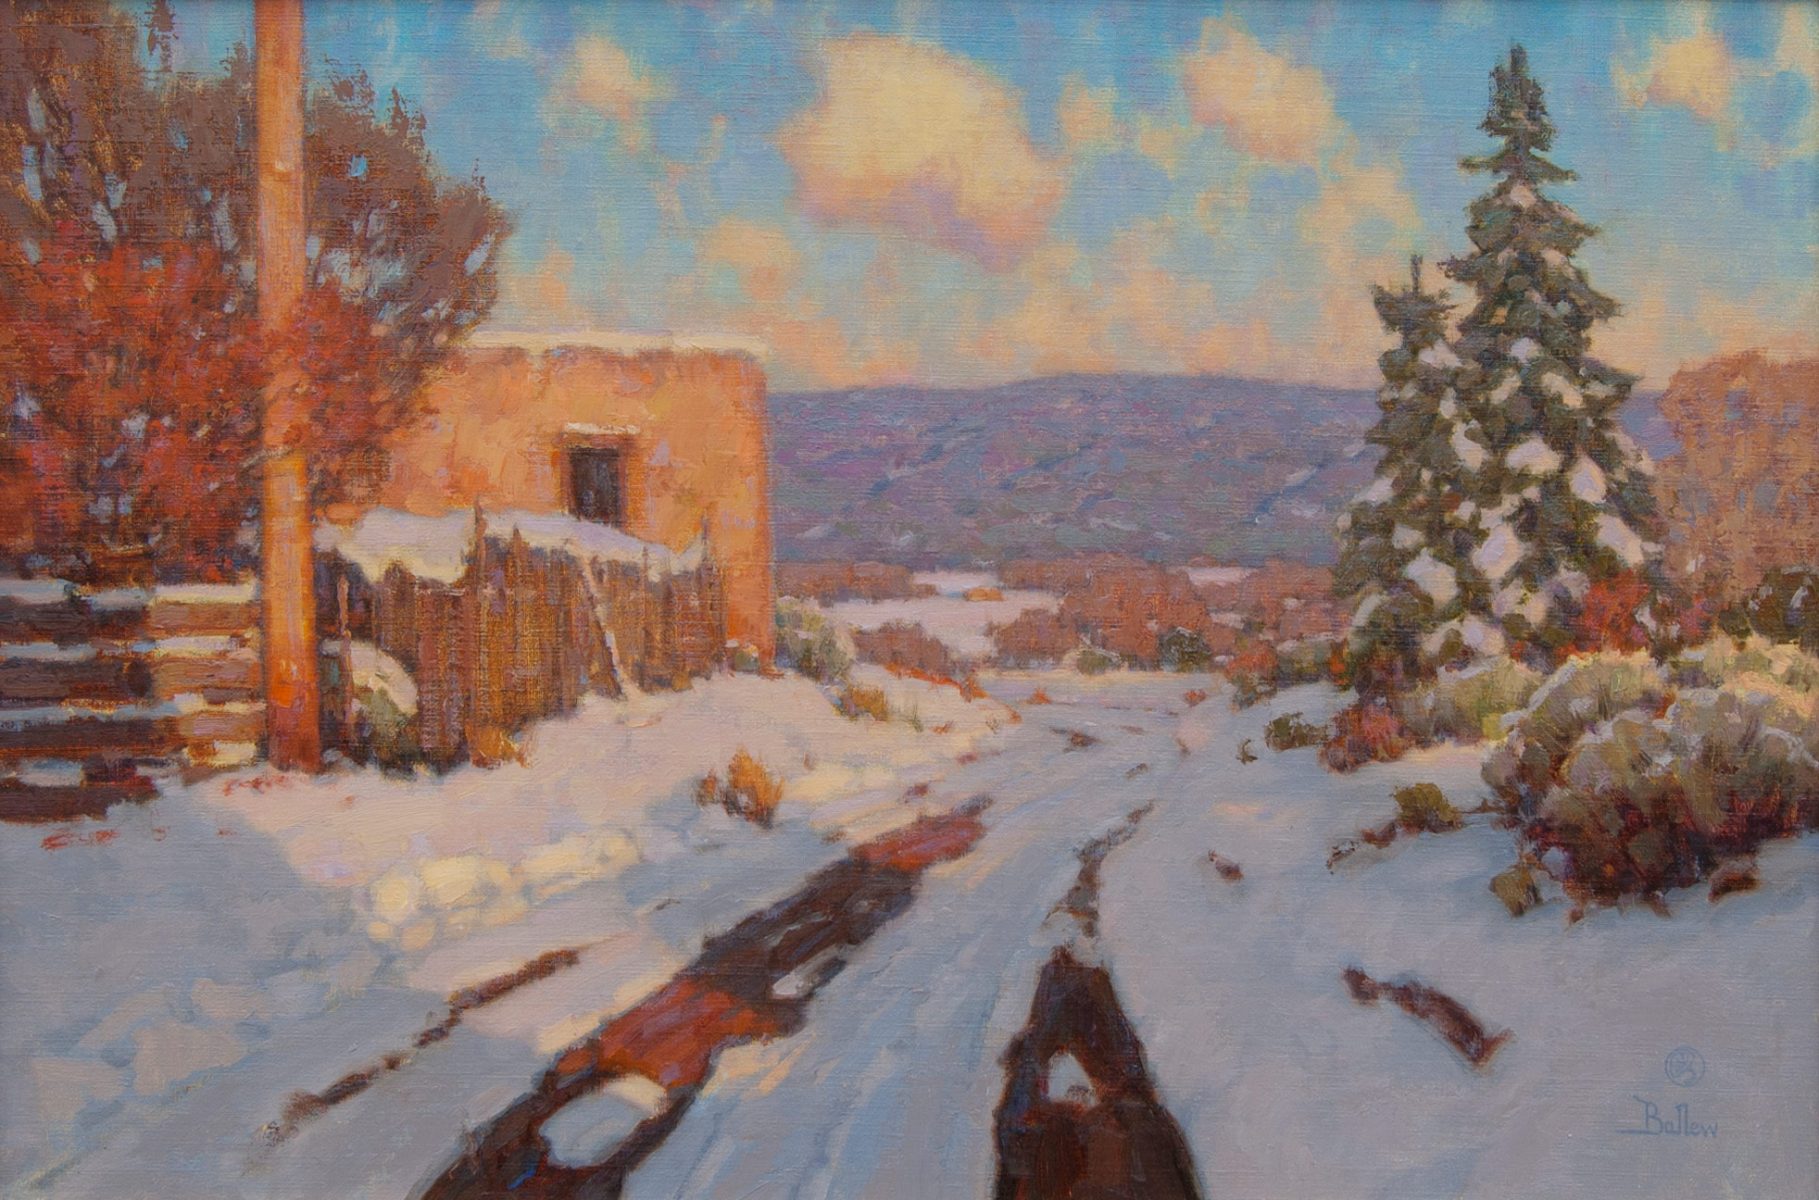 Landscape Oil Painting by David Ballew